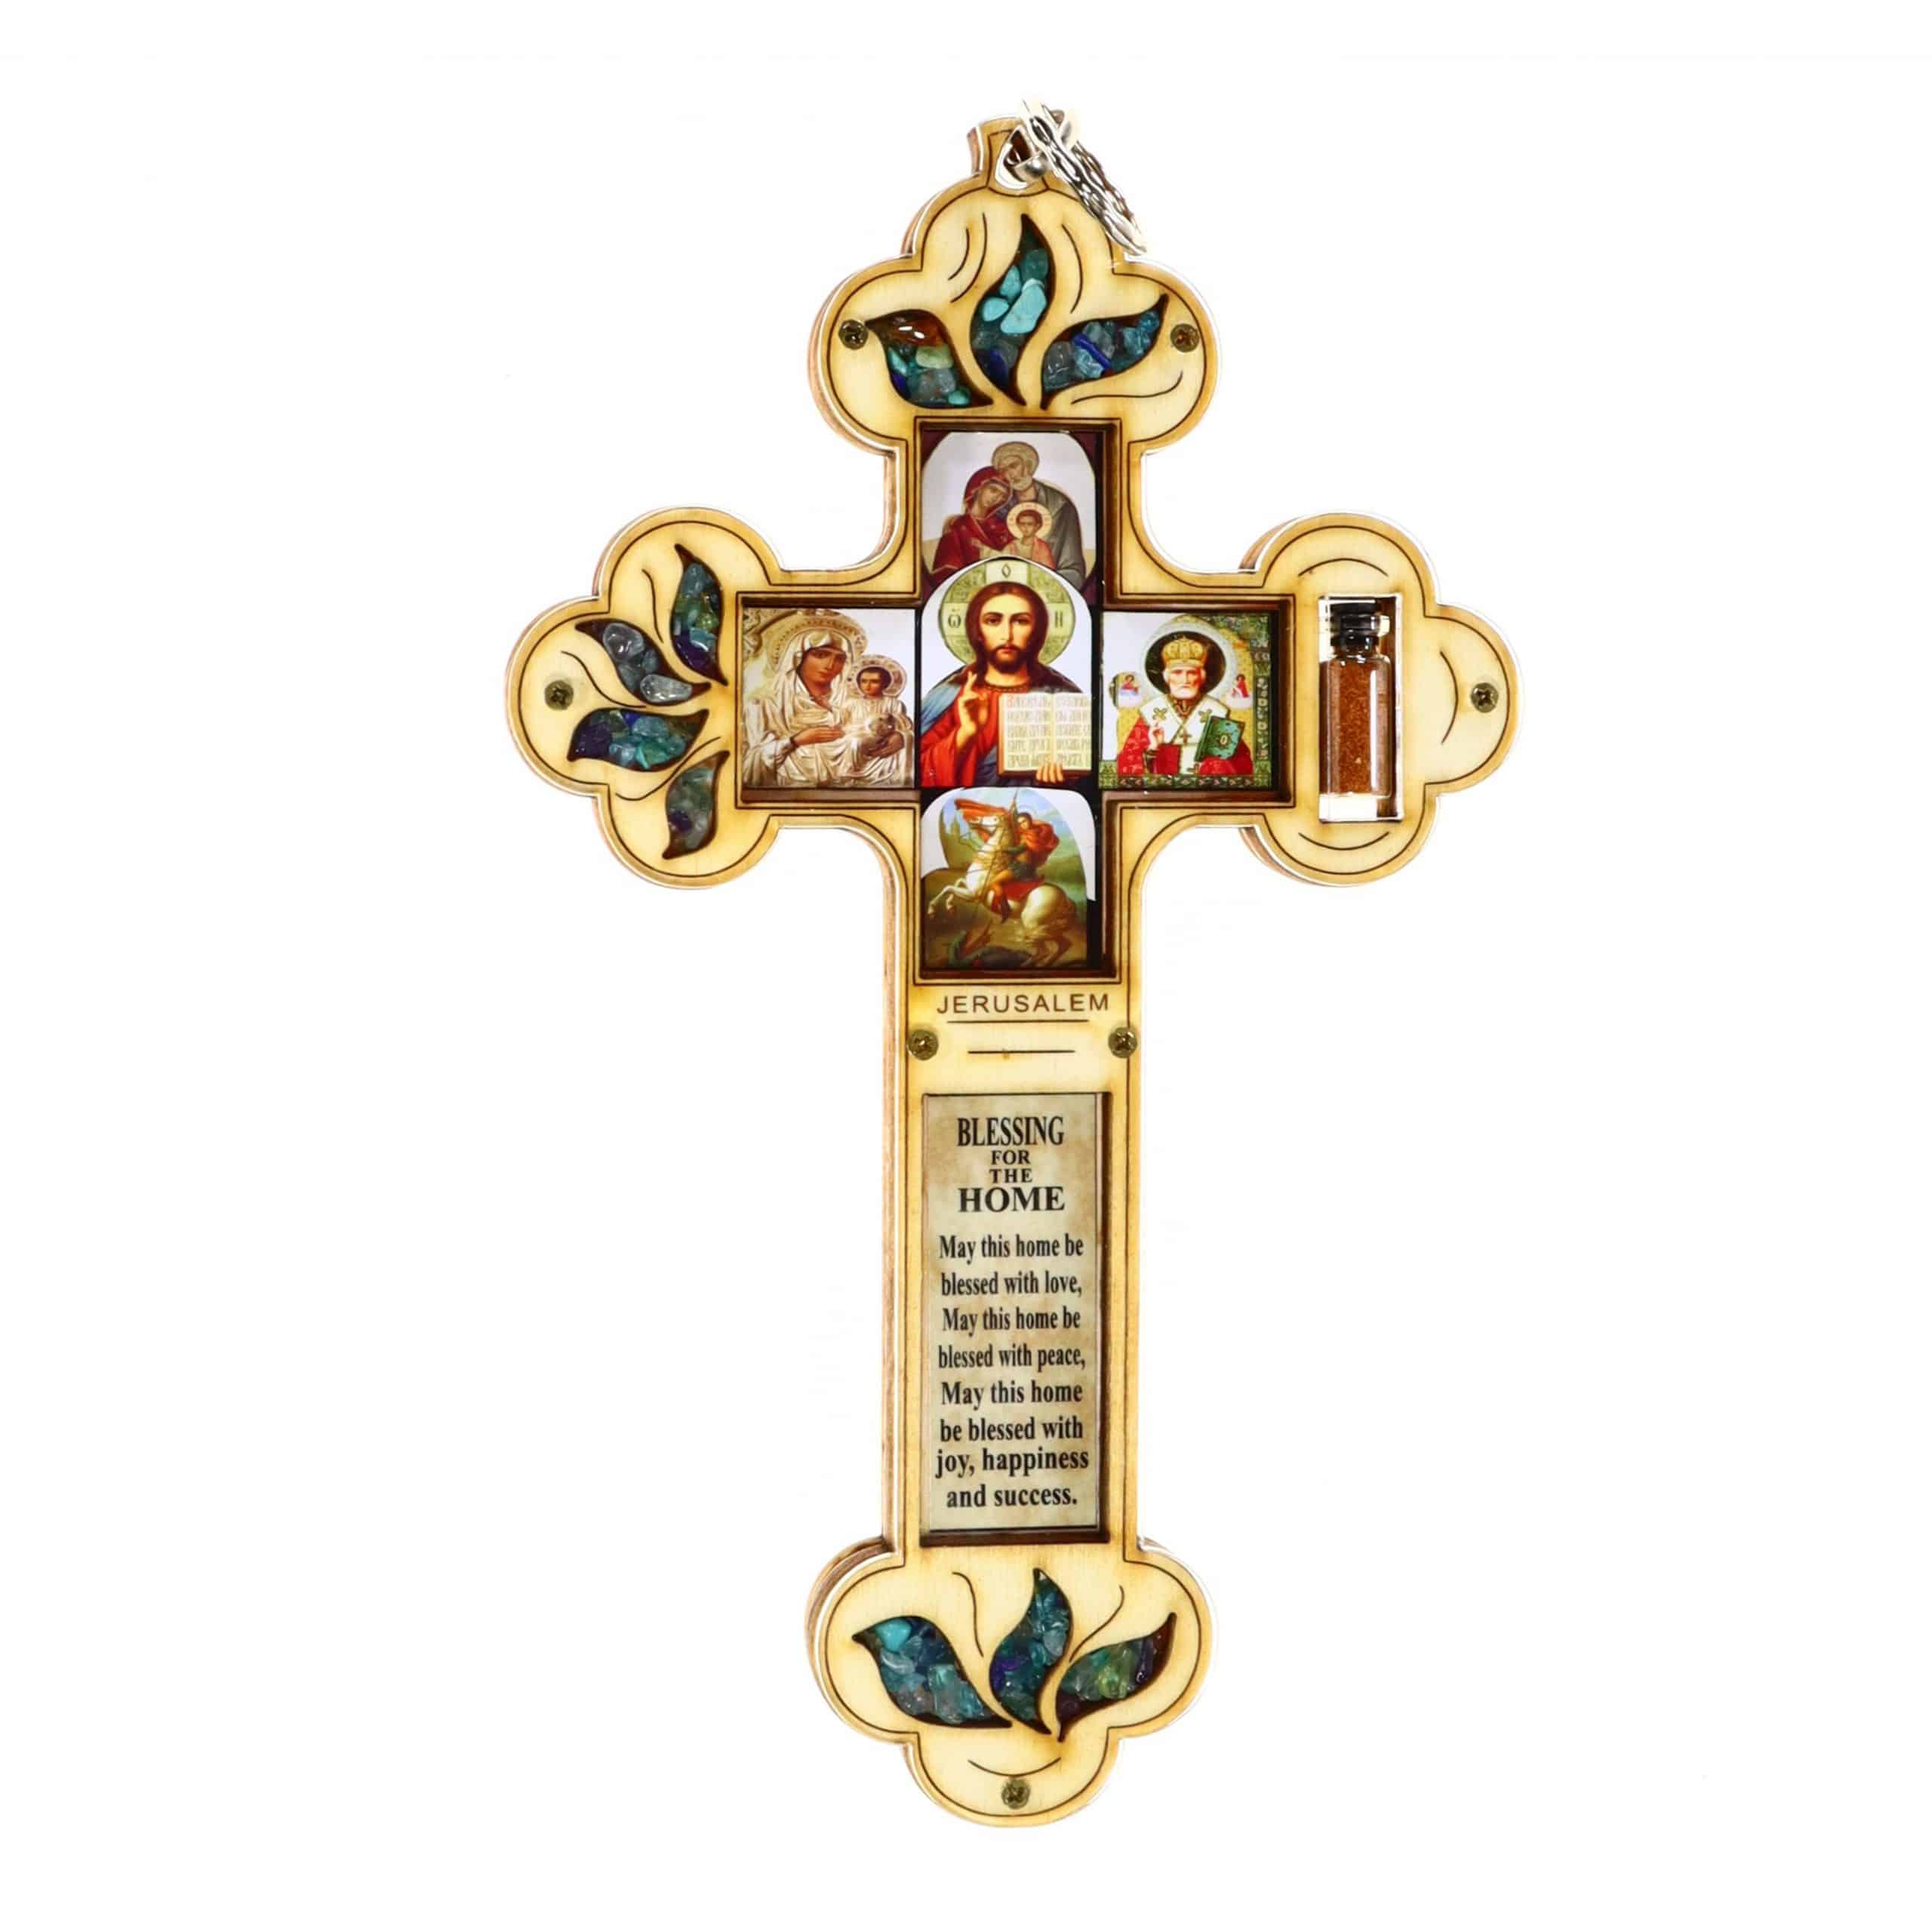 Elegant Cross Wall Art: Symbol of Faith and Redemption